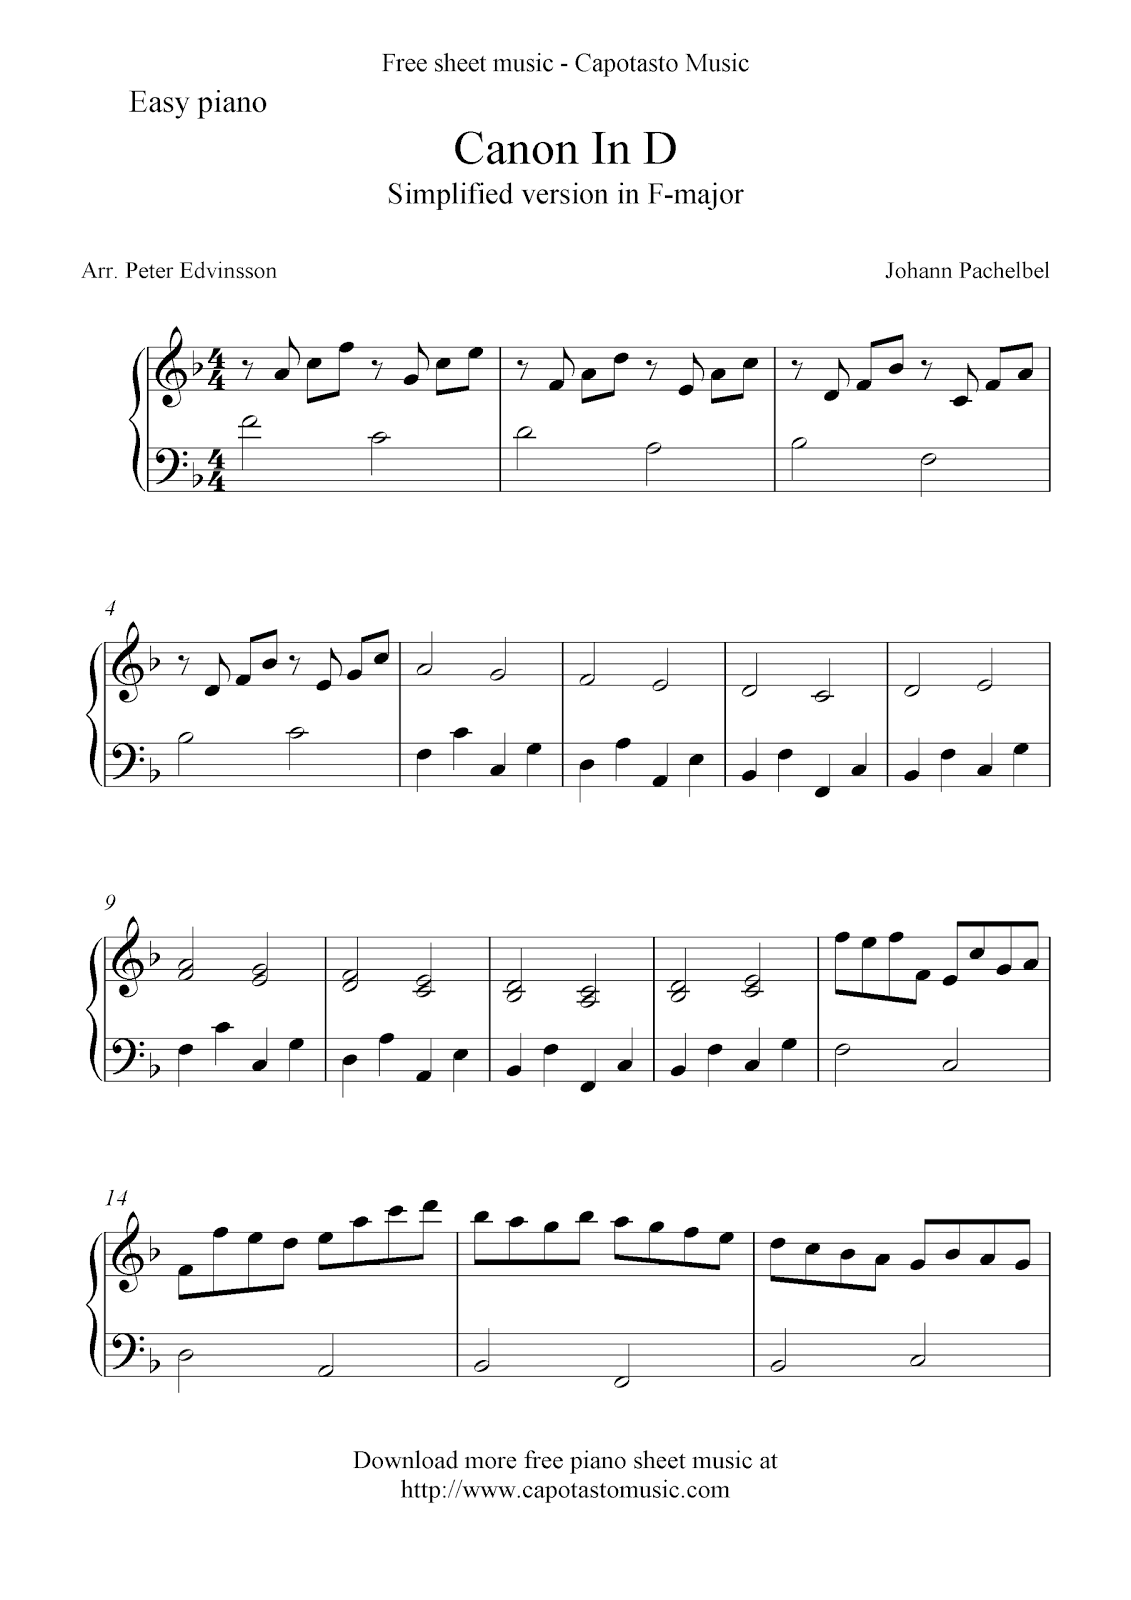 Canon In D by Pachelbel - Free piano sheet music